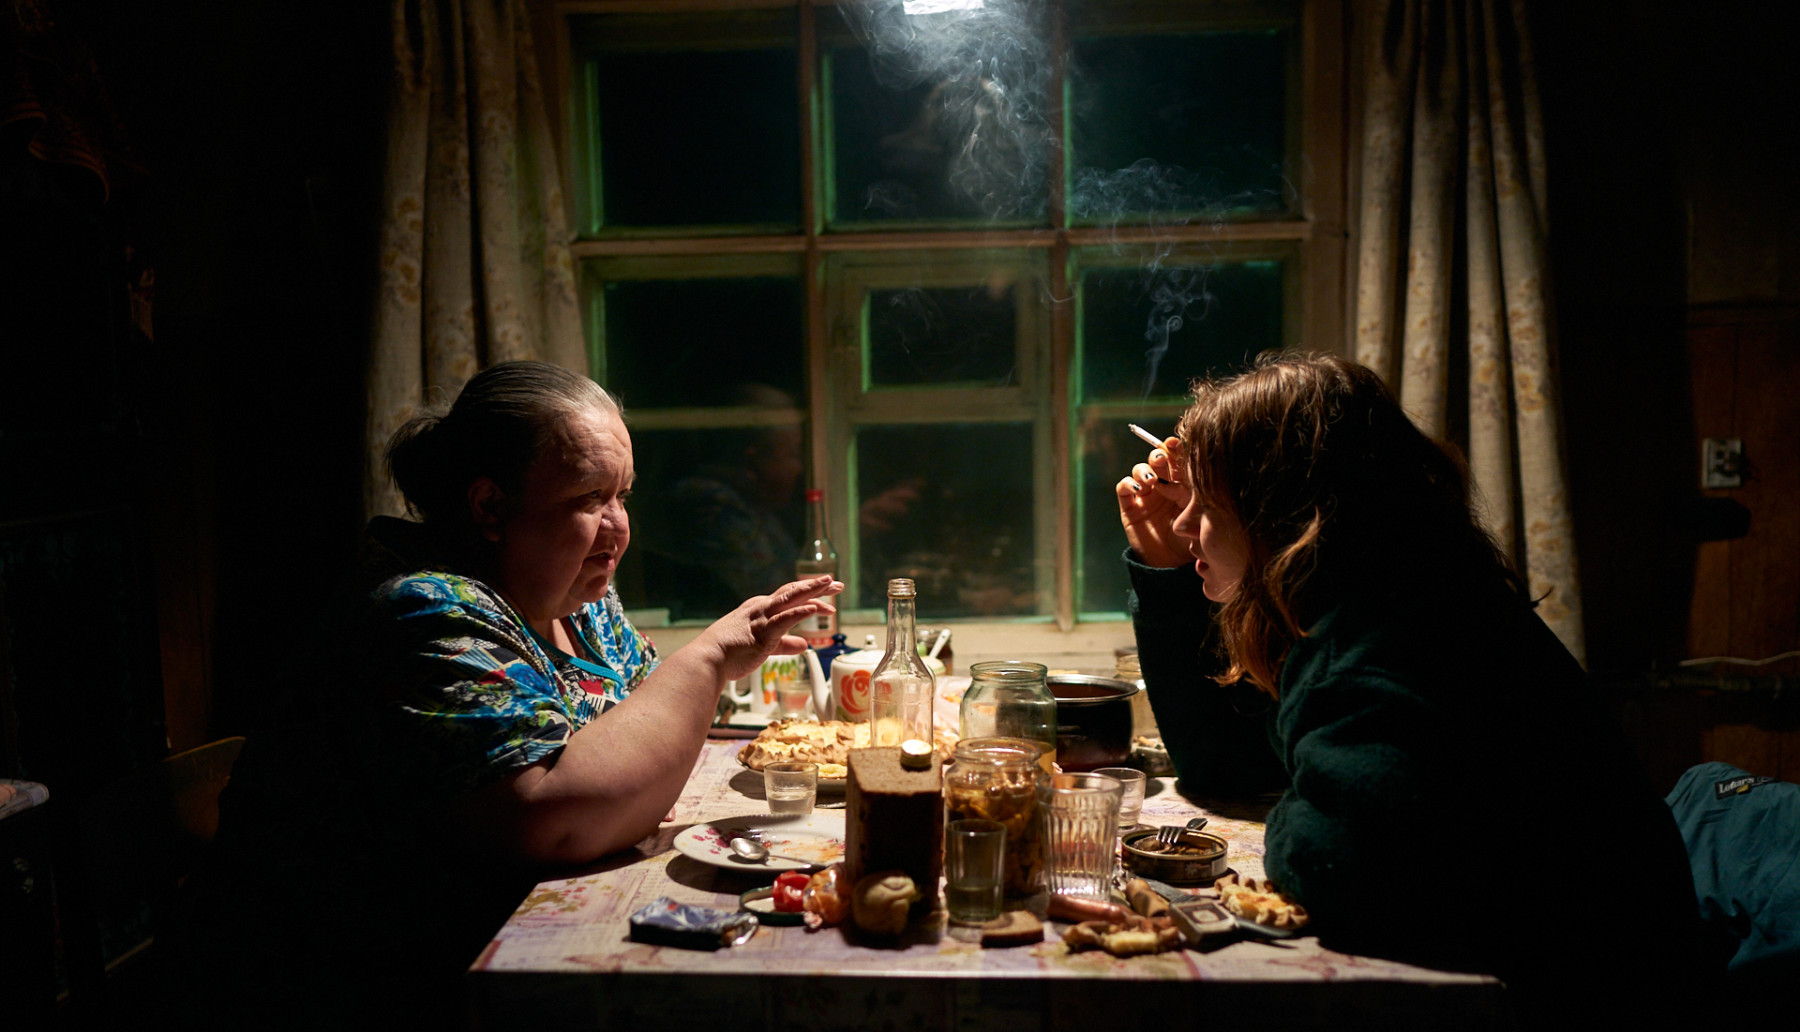 An older woman and a younger woman sit at a kitchen table, drinking and smoking and talking.